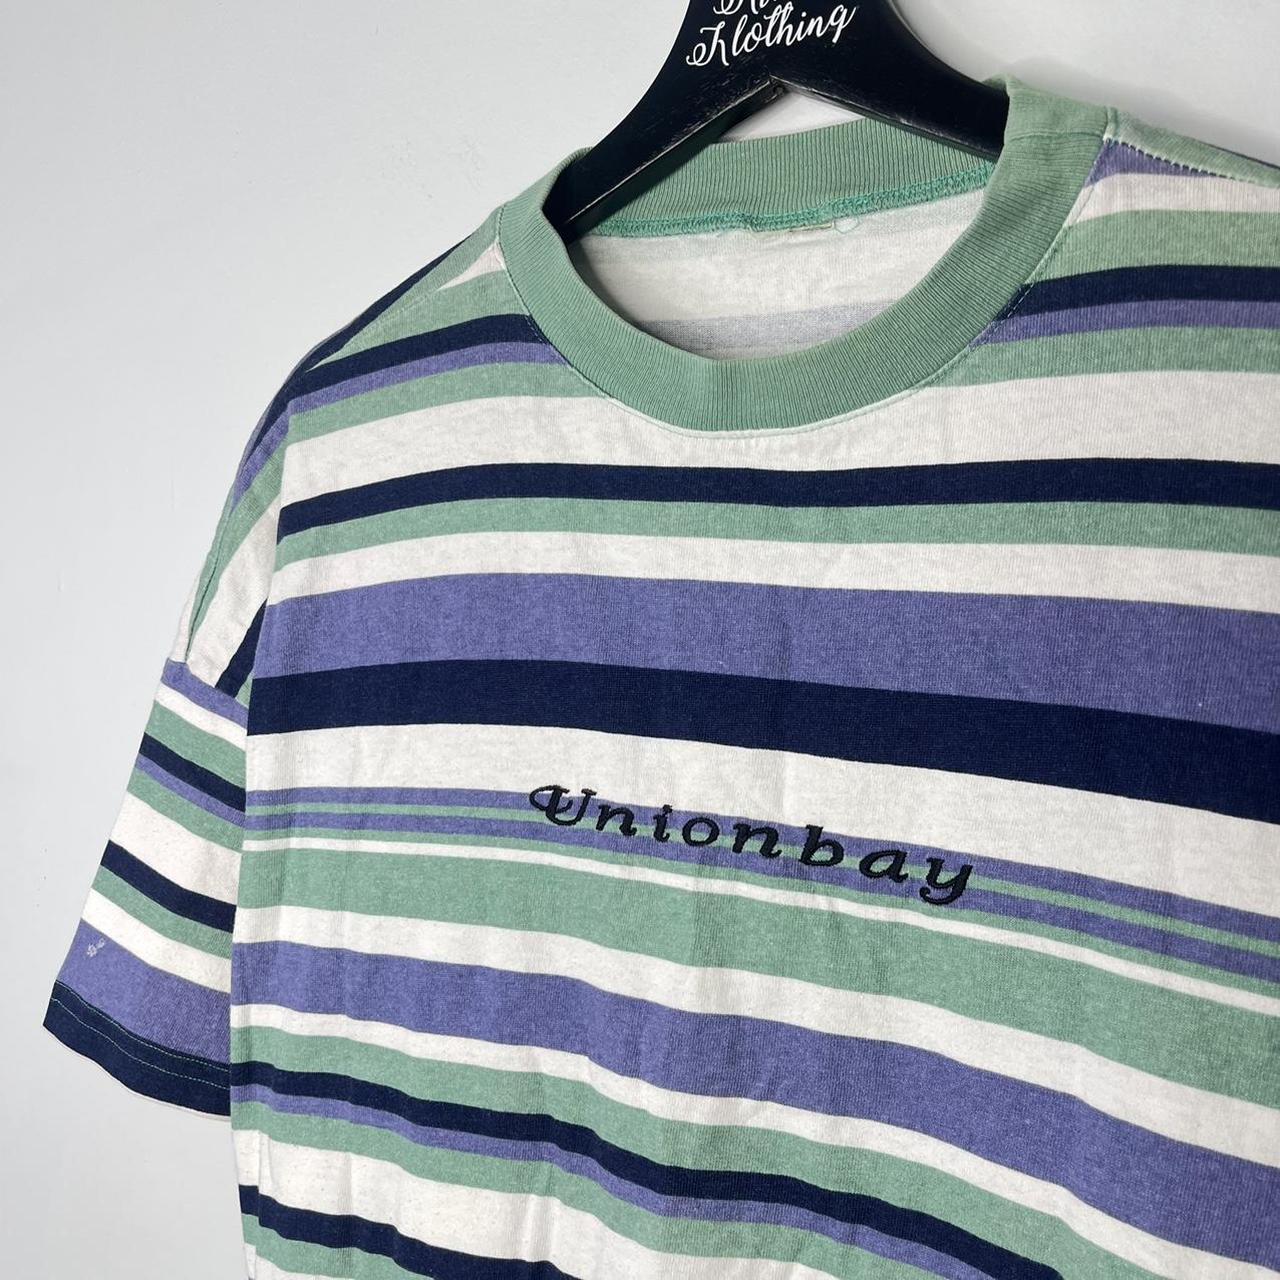 Union Bay Men's Green and Blue T-shirt (2)